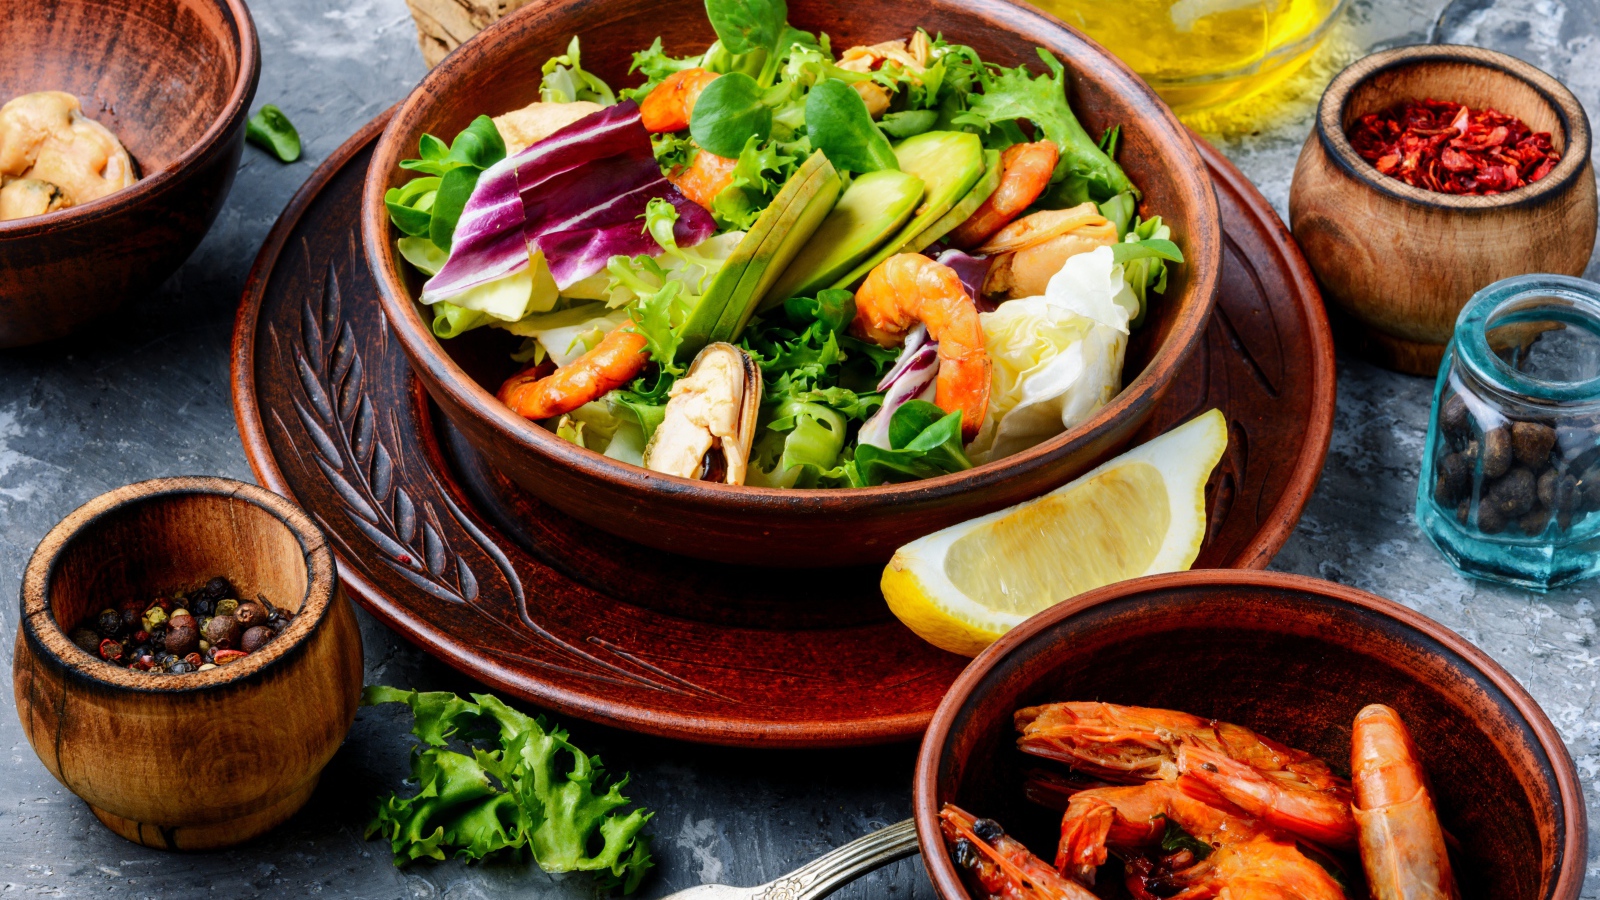 Salad with seafood is on the table with spices